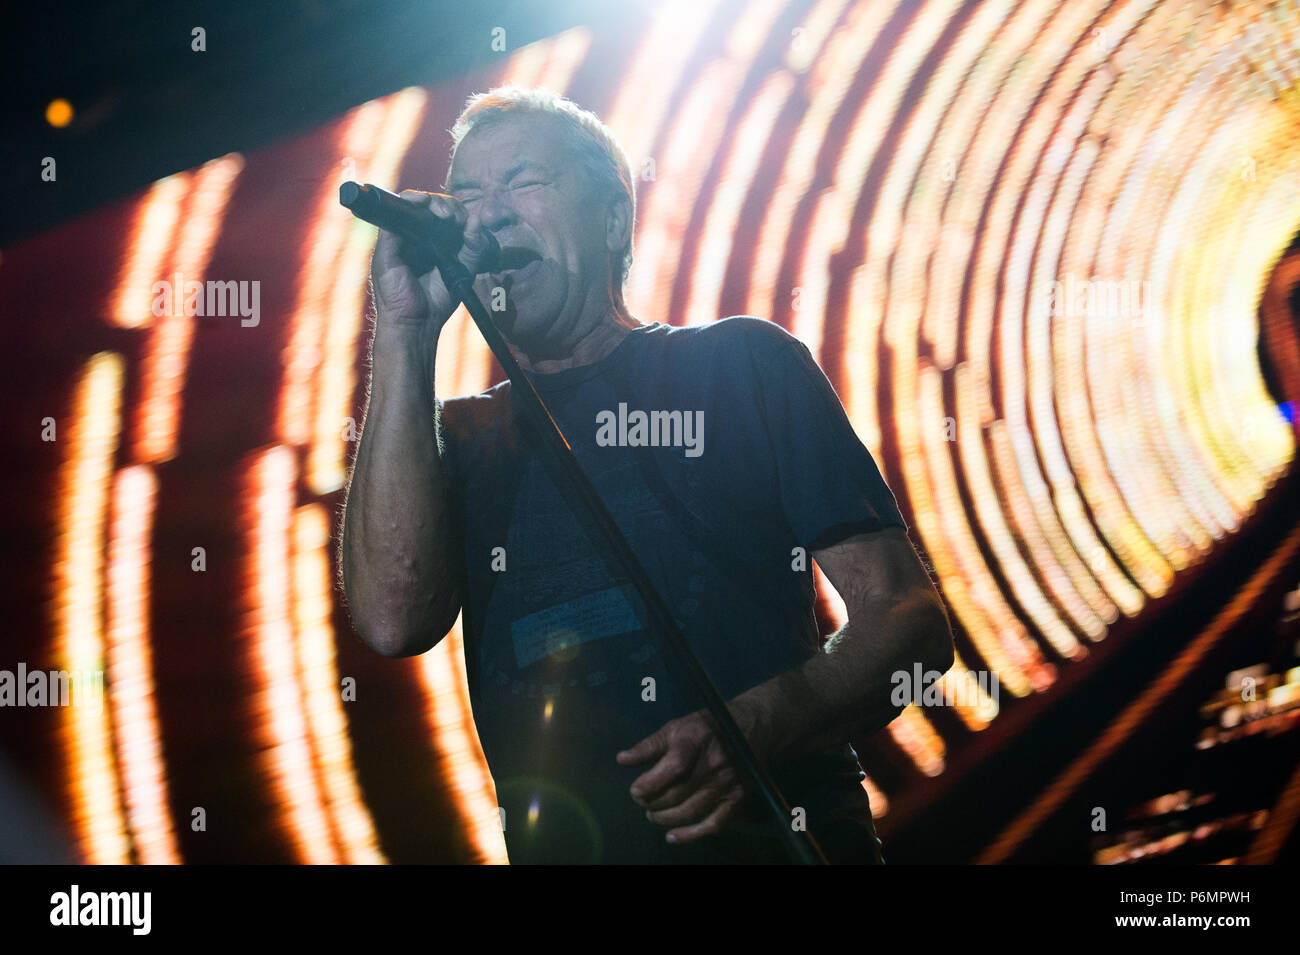 Deep Purple vocalist , Ian Gillan performs. Deep purple band performs at Tauron Arena Krakow as part of the farewell tour, The Long Goodbye Tour. Stock Photo